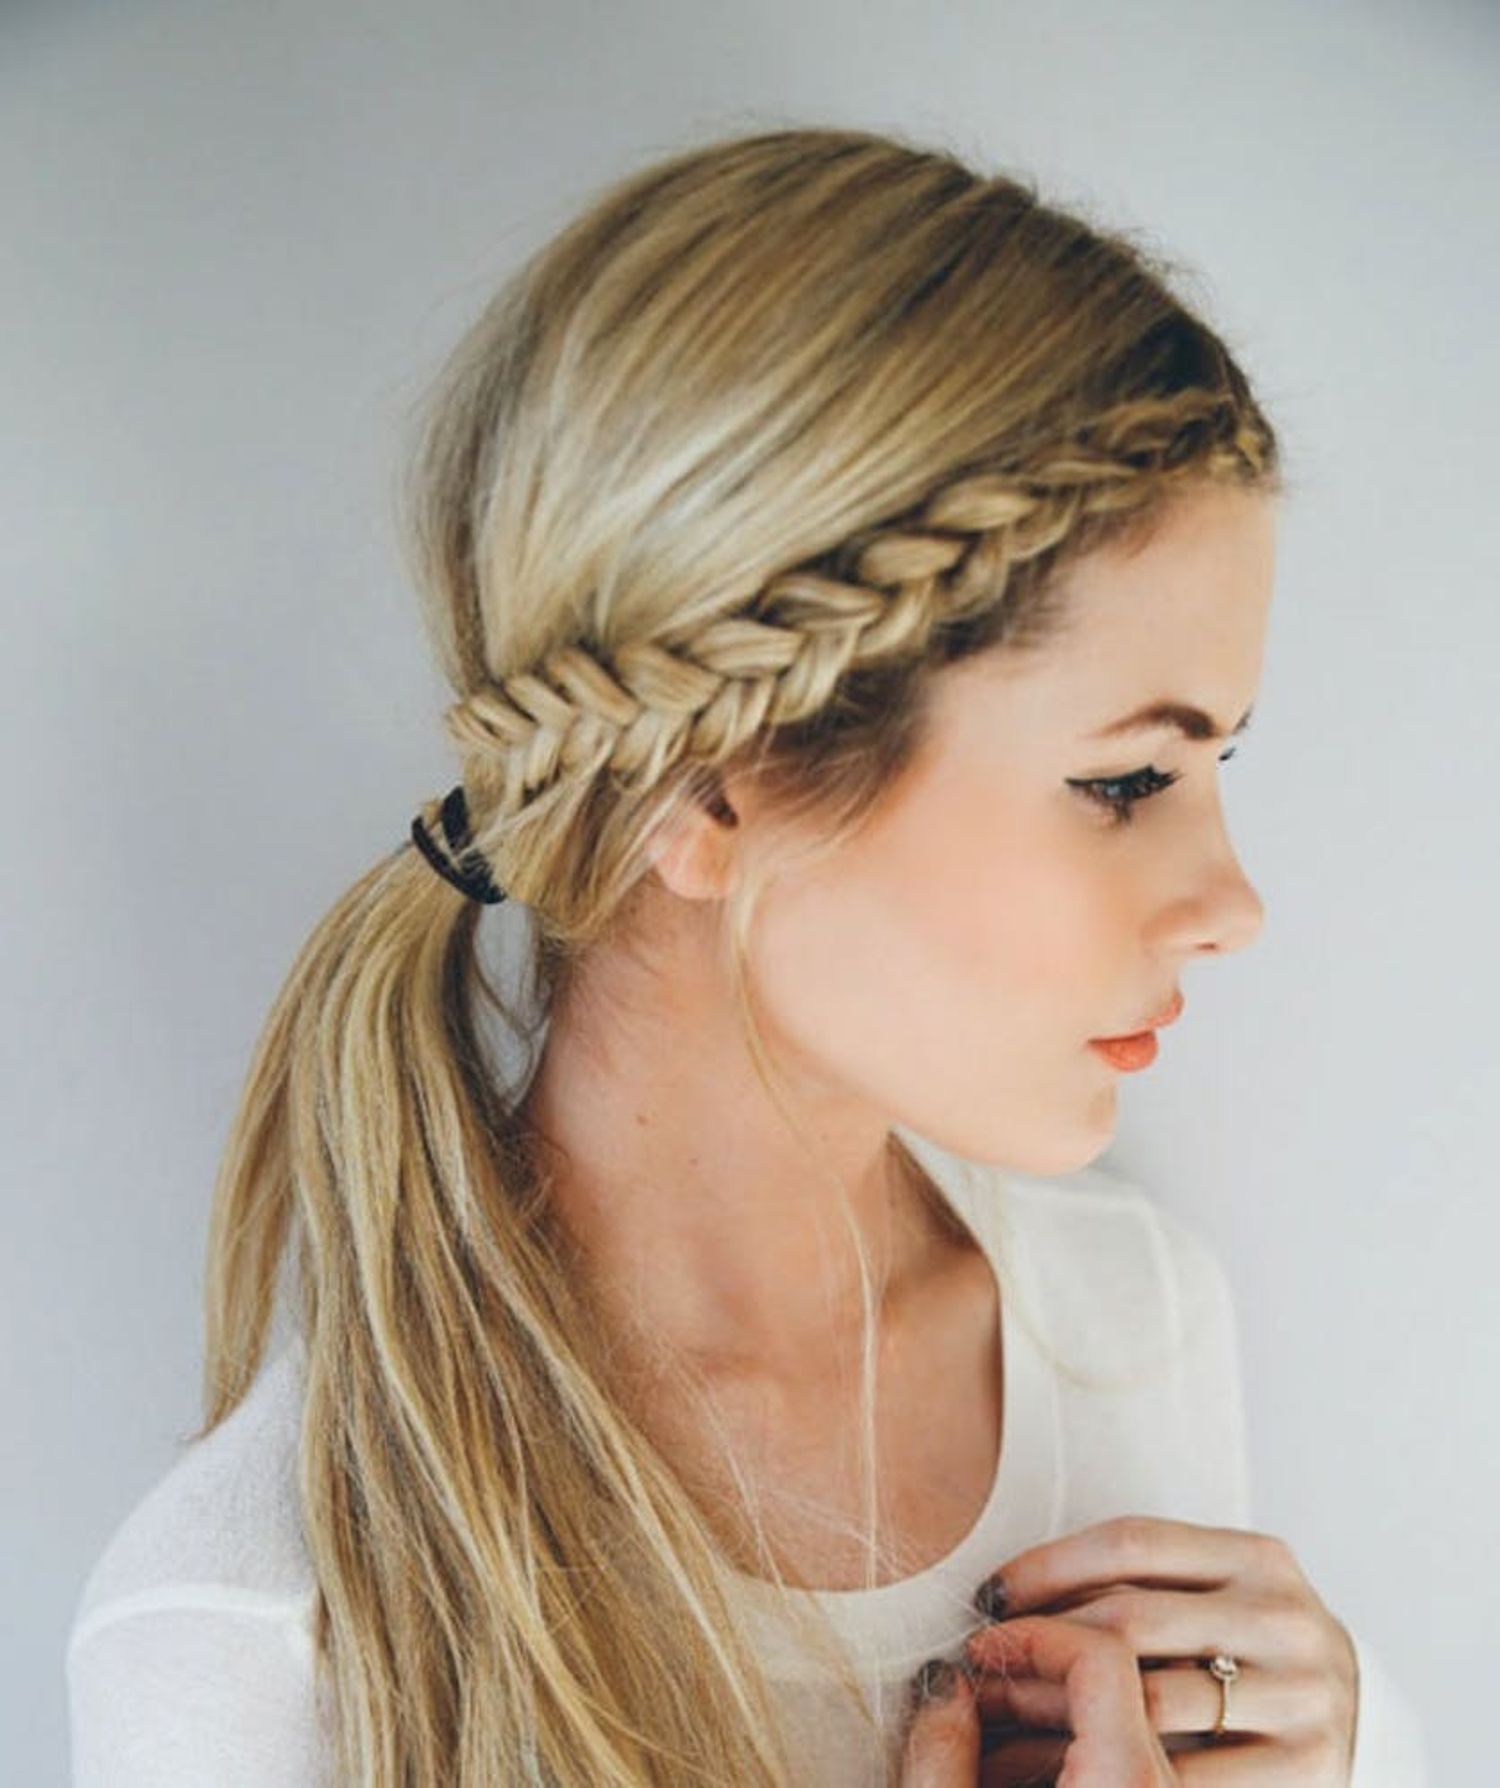 9 Hairstyles for Hitting the Slopes - Brit + Co